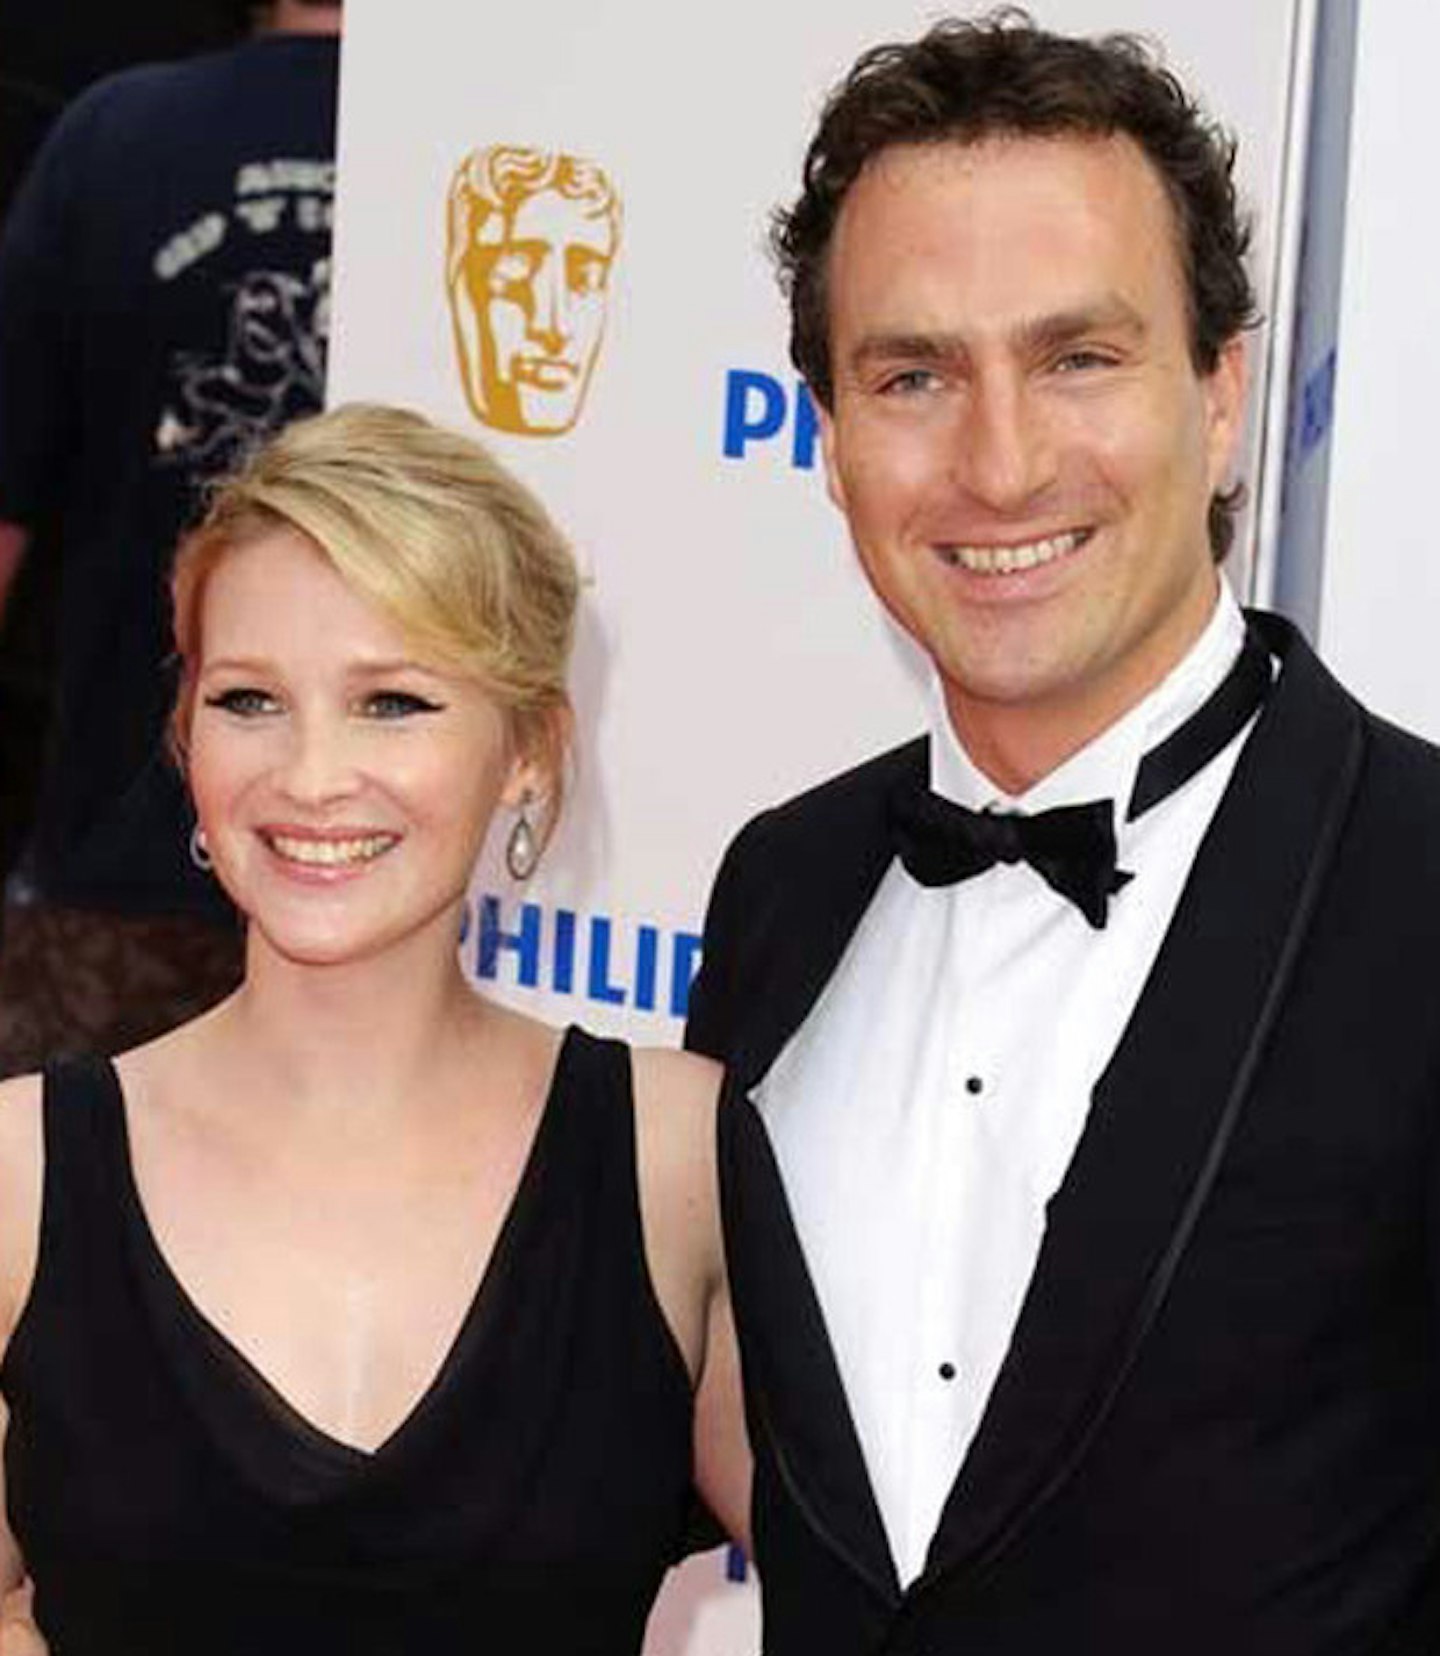 February 2013: Joanna Page welcomed daughter Eva